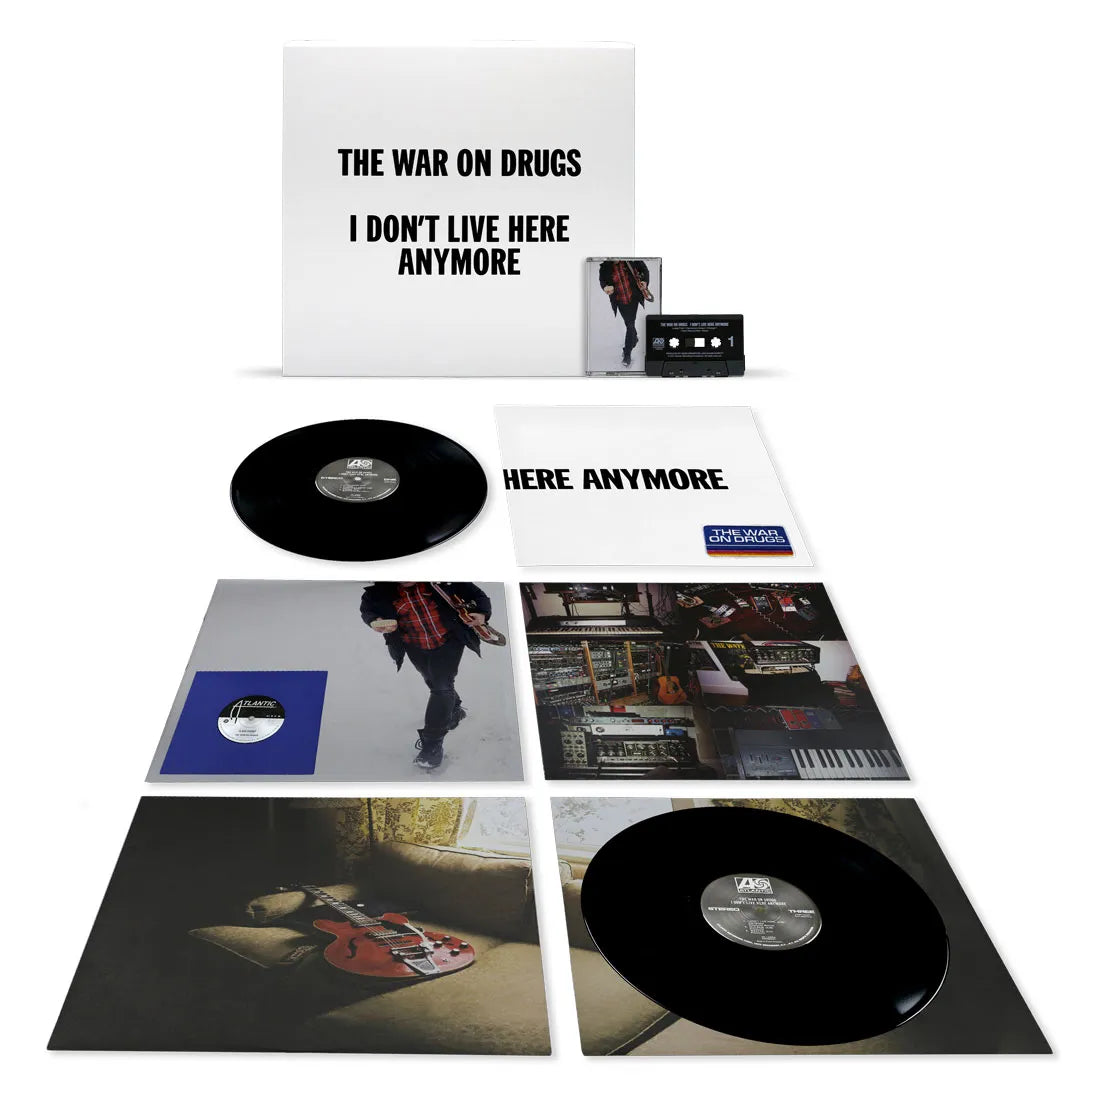  |  Vinyl LP | War On Drugs - I Don't Live Here Anymore (2LP+7''+MC+Postcard+poster+Patch) | Records on Vinyl